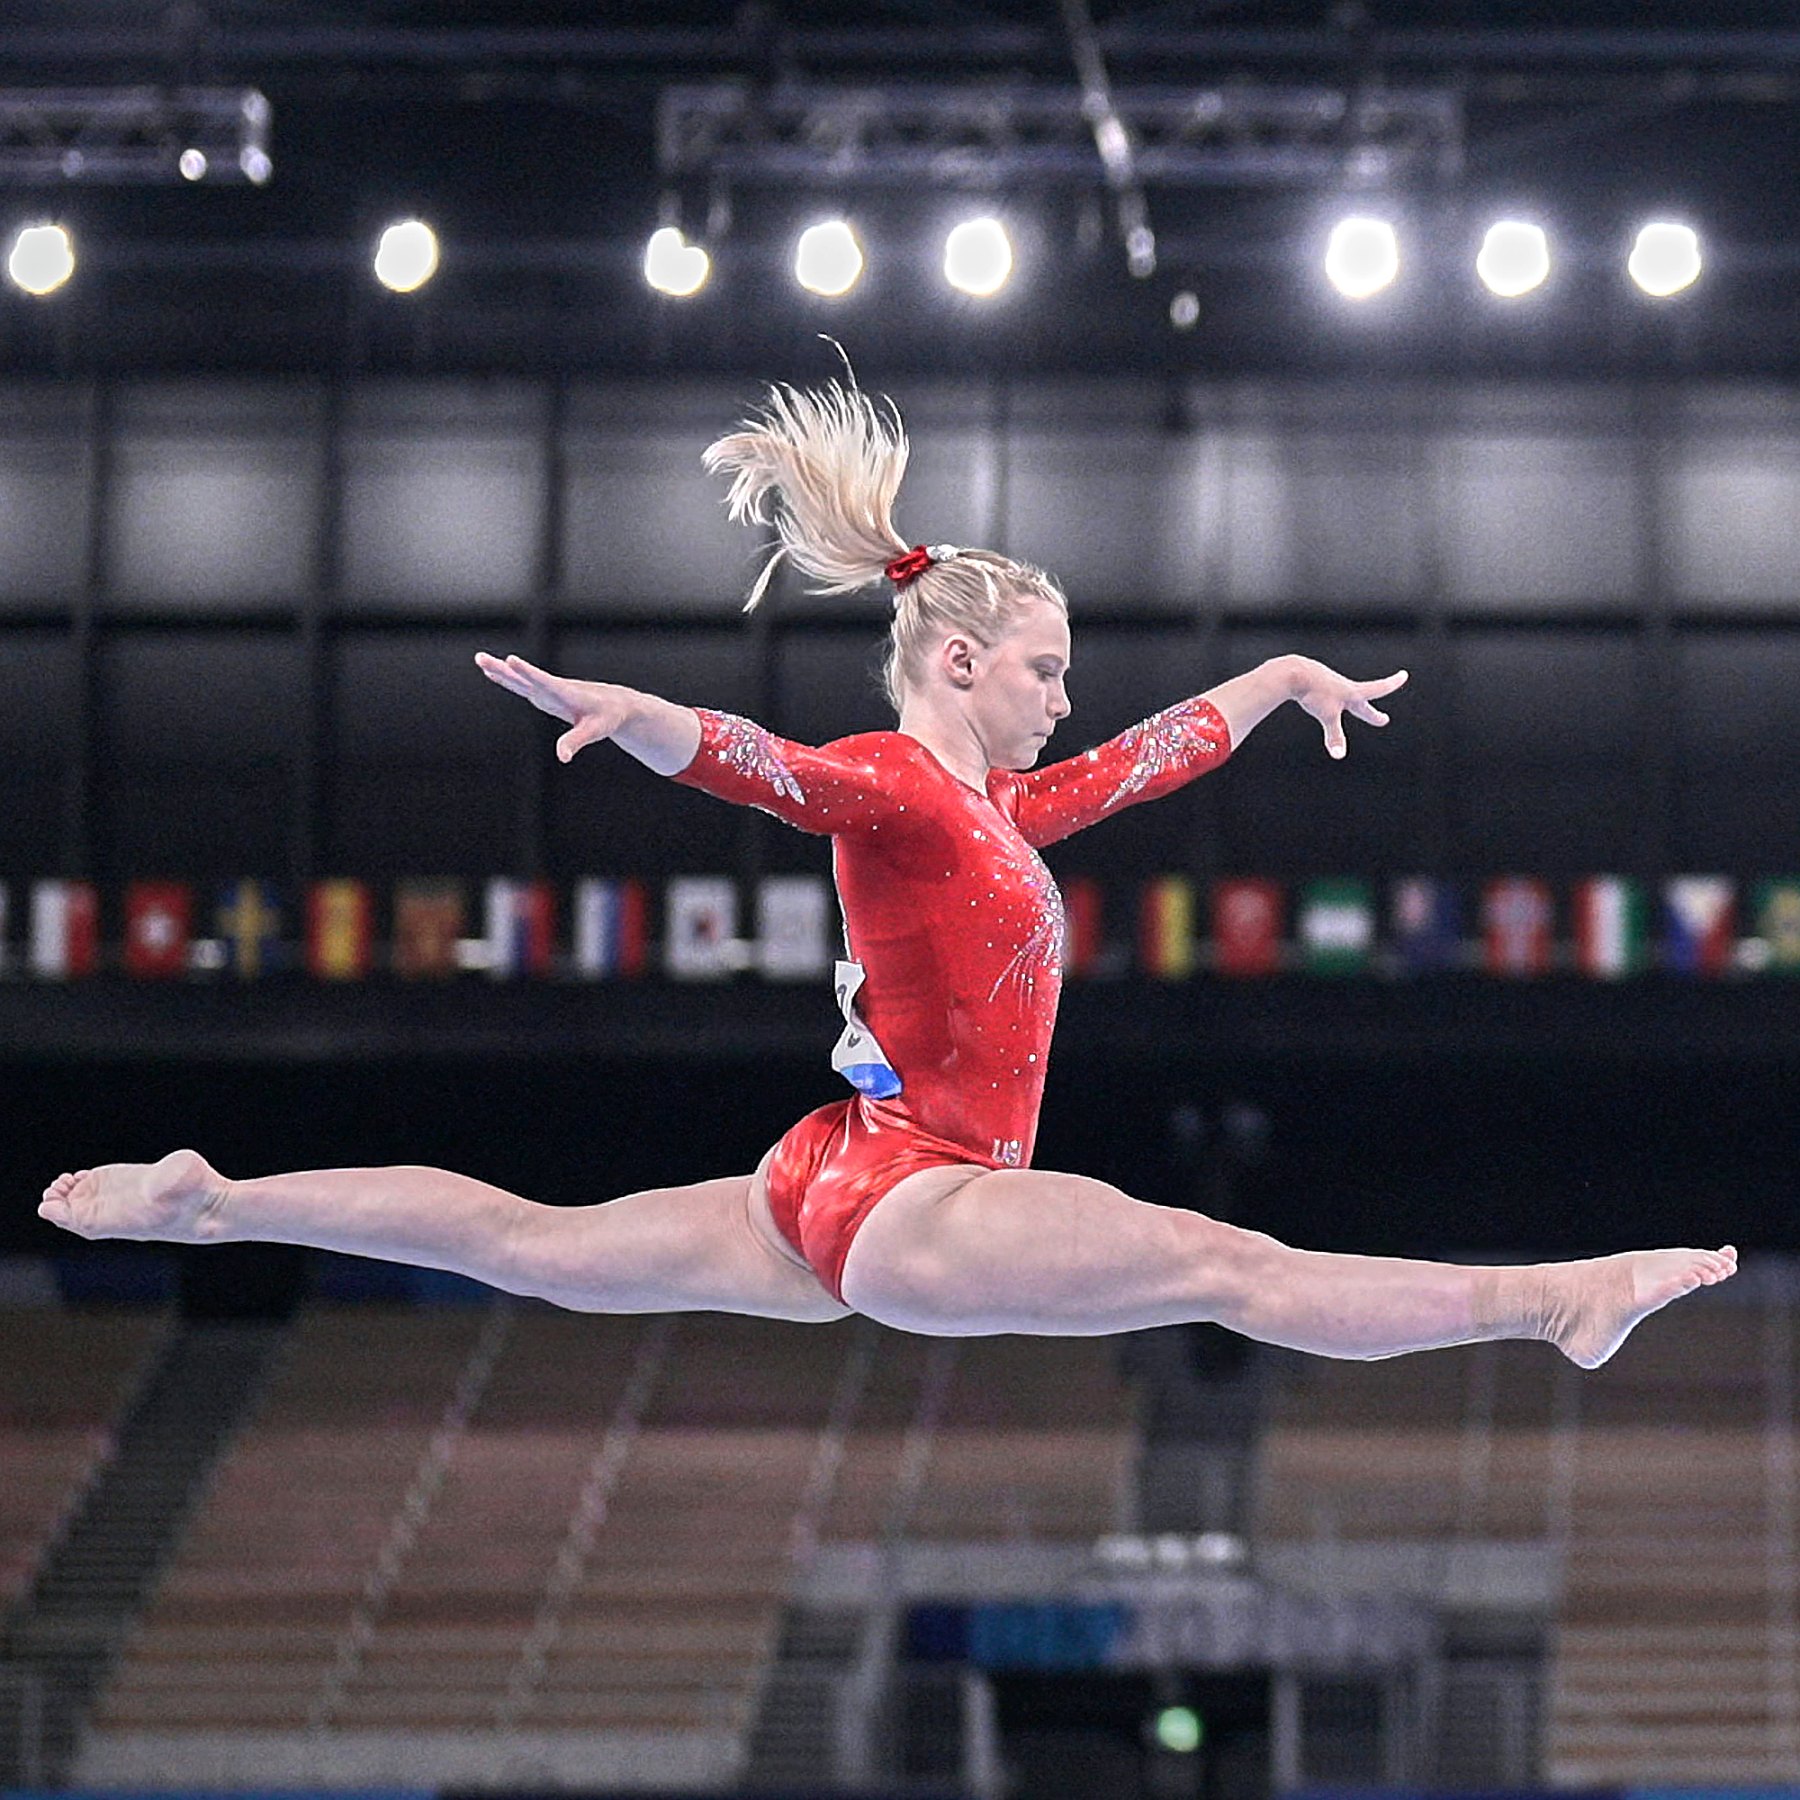 Team USA's Jade Carey 5 Things to Know About the Gymnast